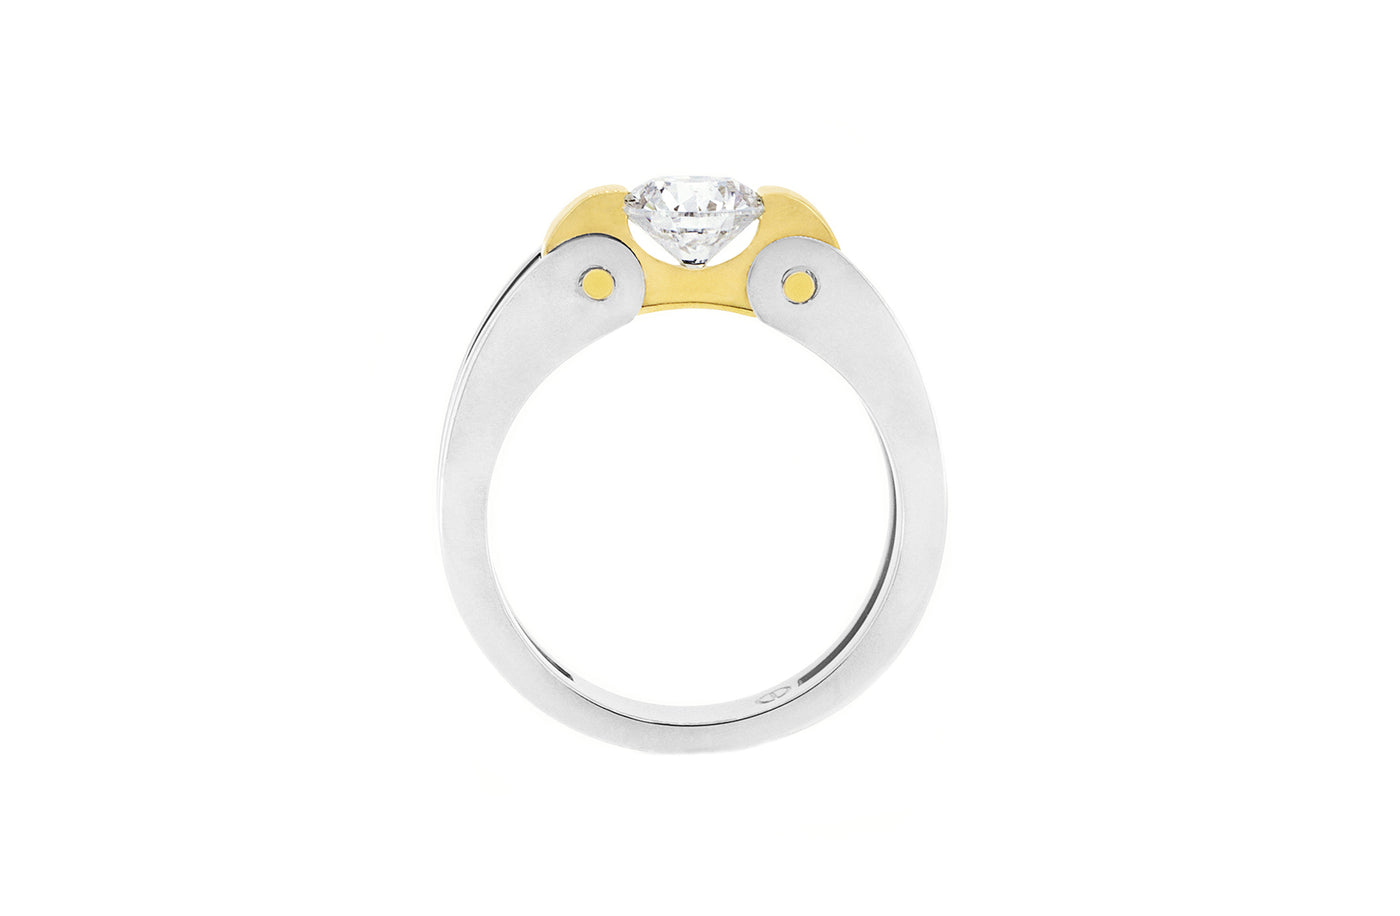 Inspired Collection, Brilliant Diamond, Platinum, 18ct, 18k, Yellow Gold, end set, claw set, Circlpd, fine Jewelry, fine Jewellery, round brilliant cut, modern ring, contemporary ring, tension set